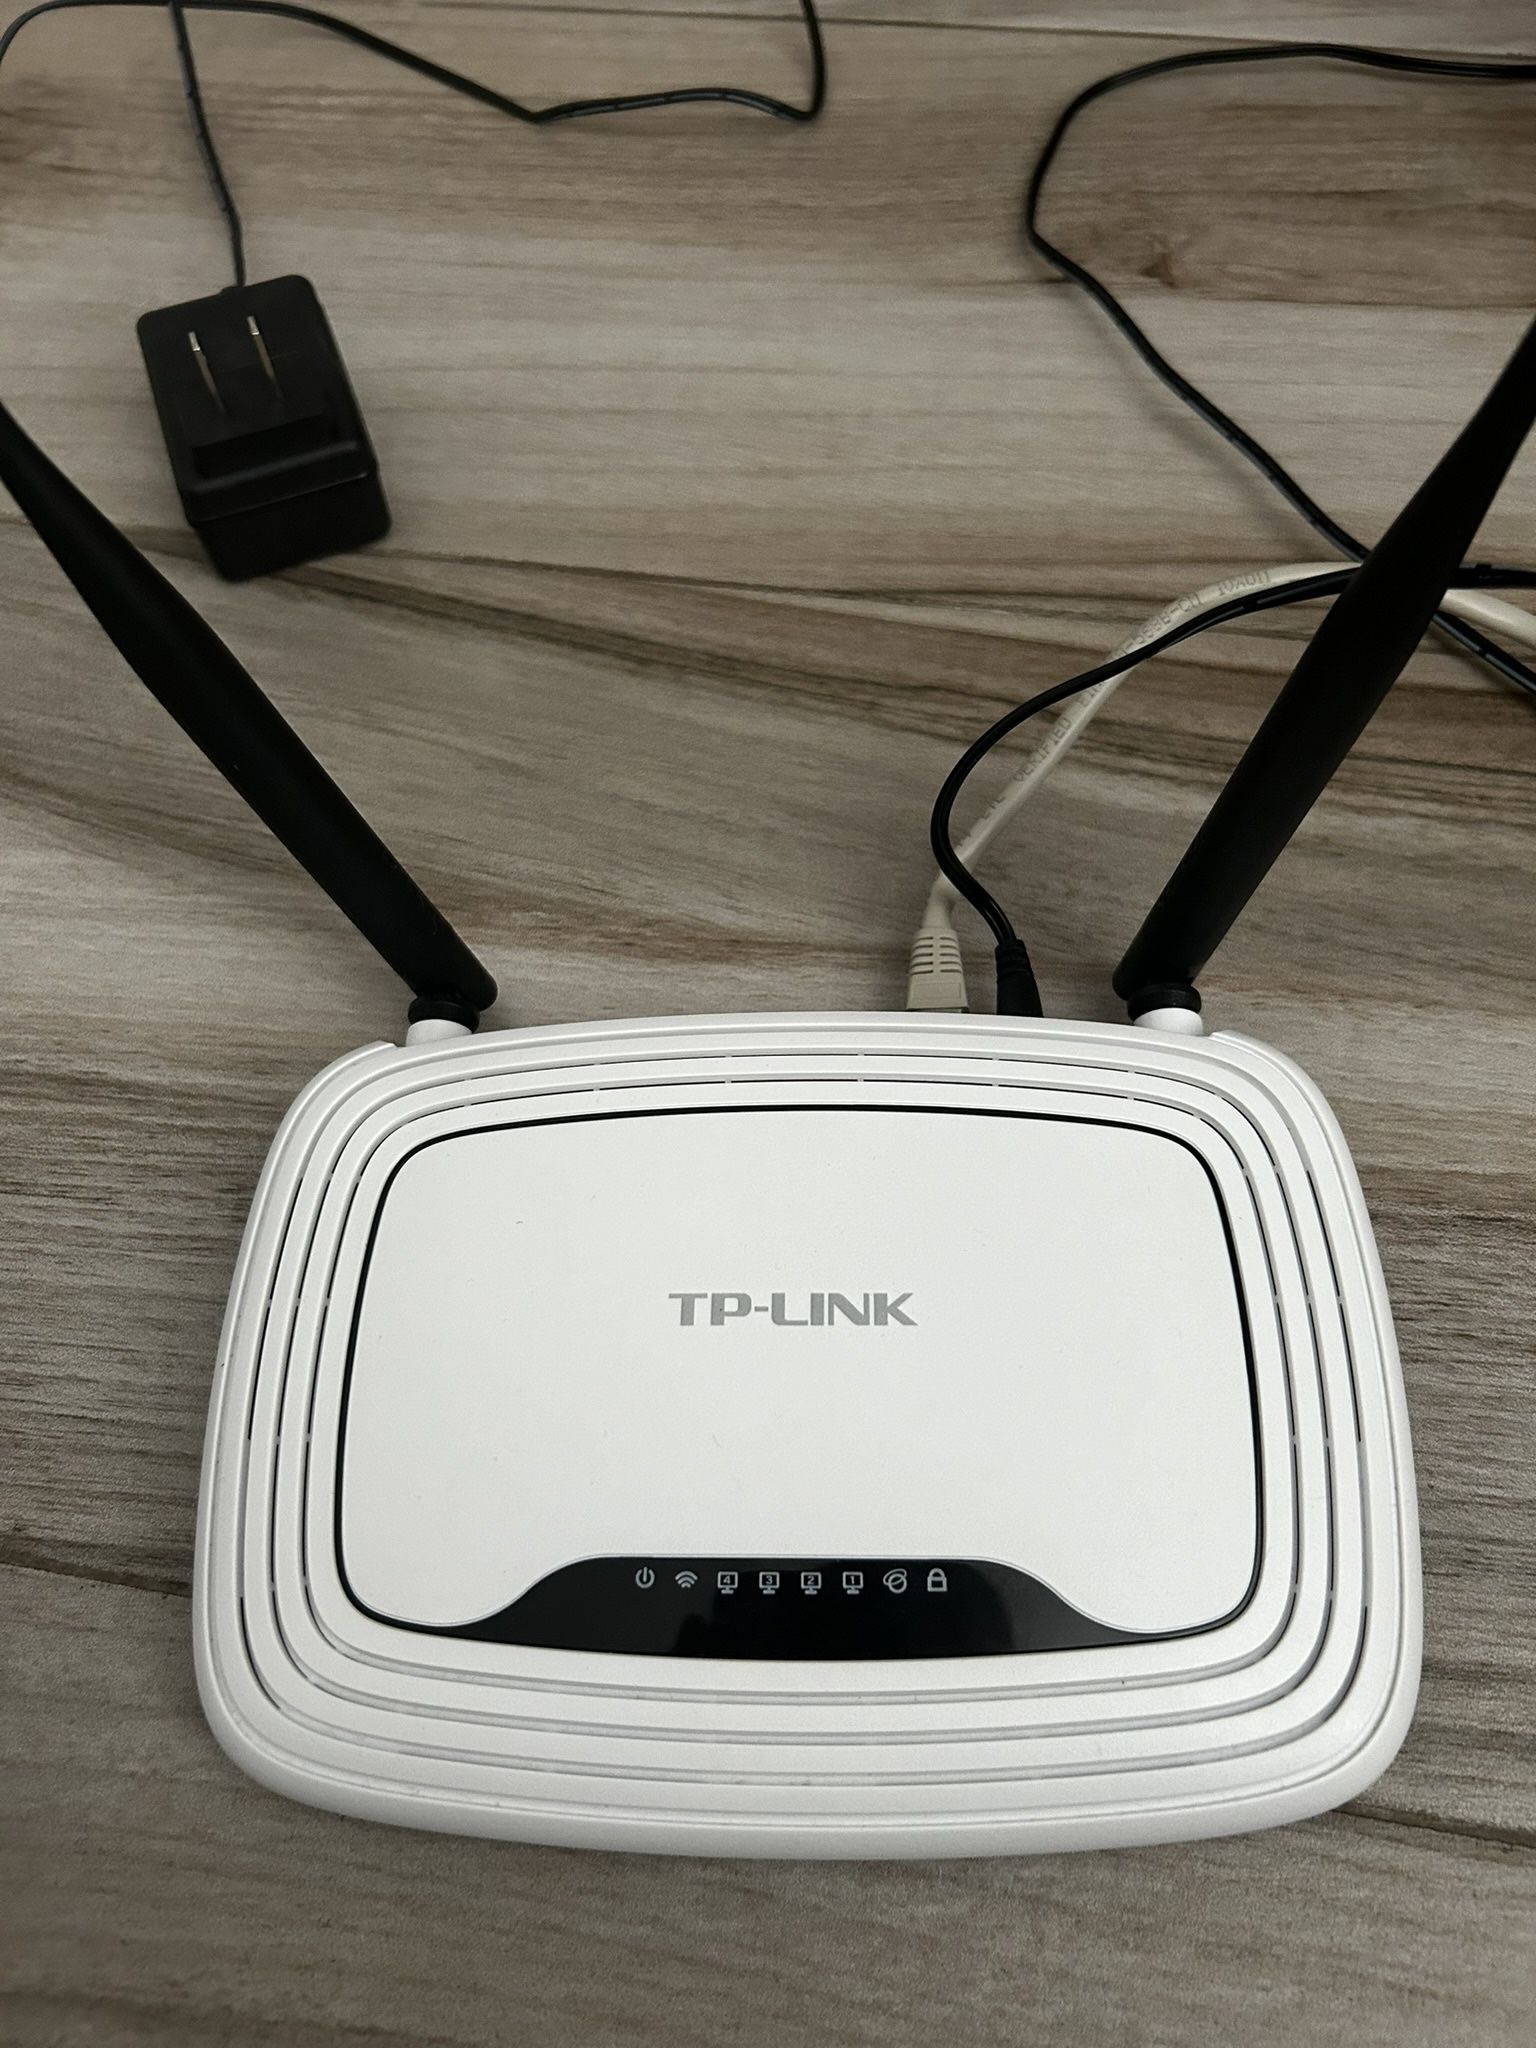 TP link Wireless N 300 Mbps Internet Router